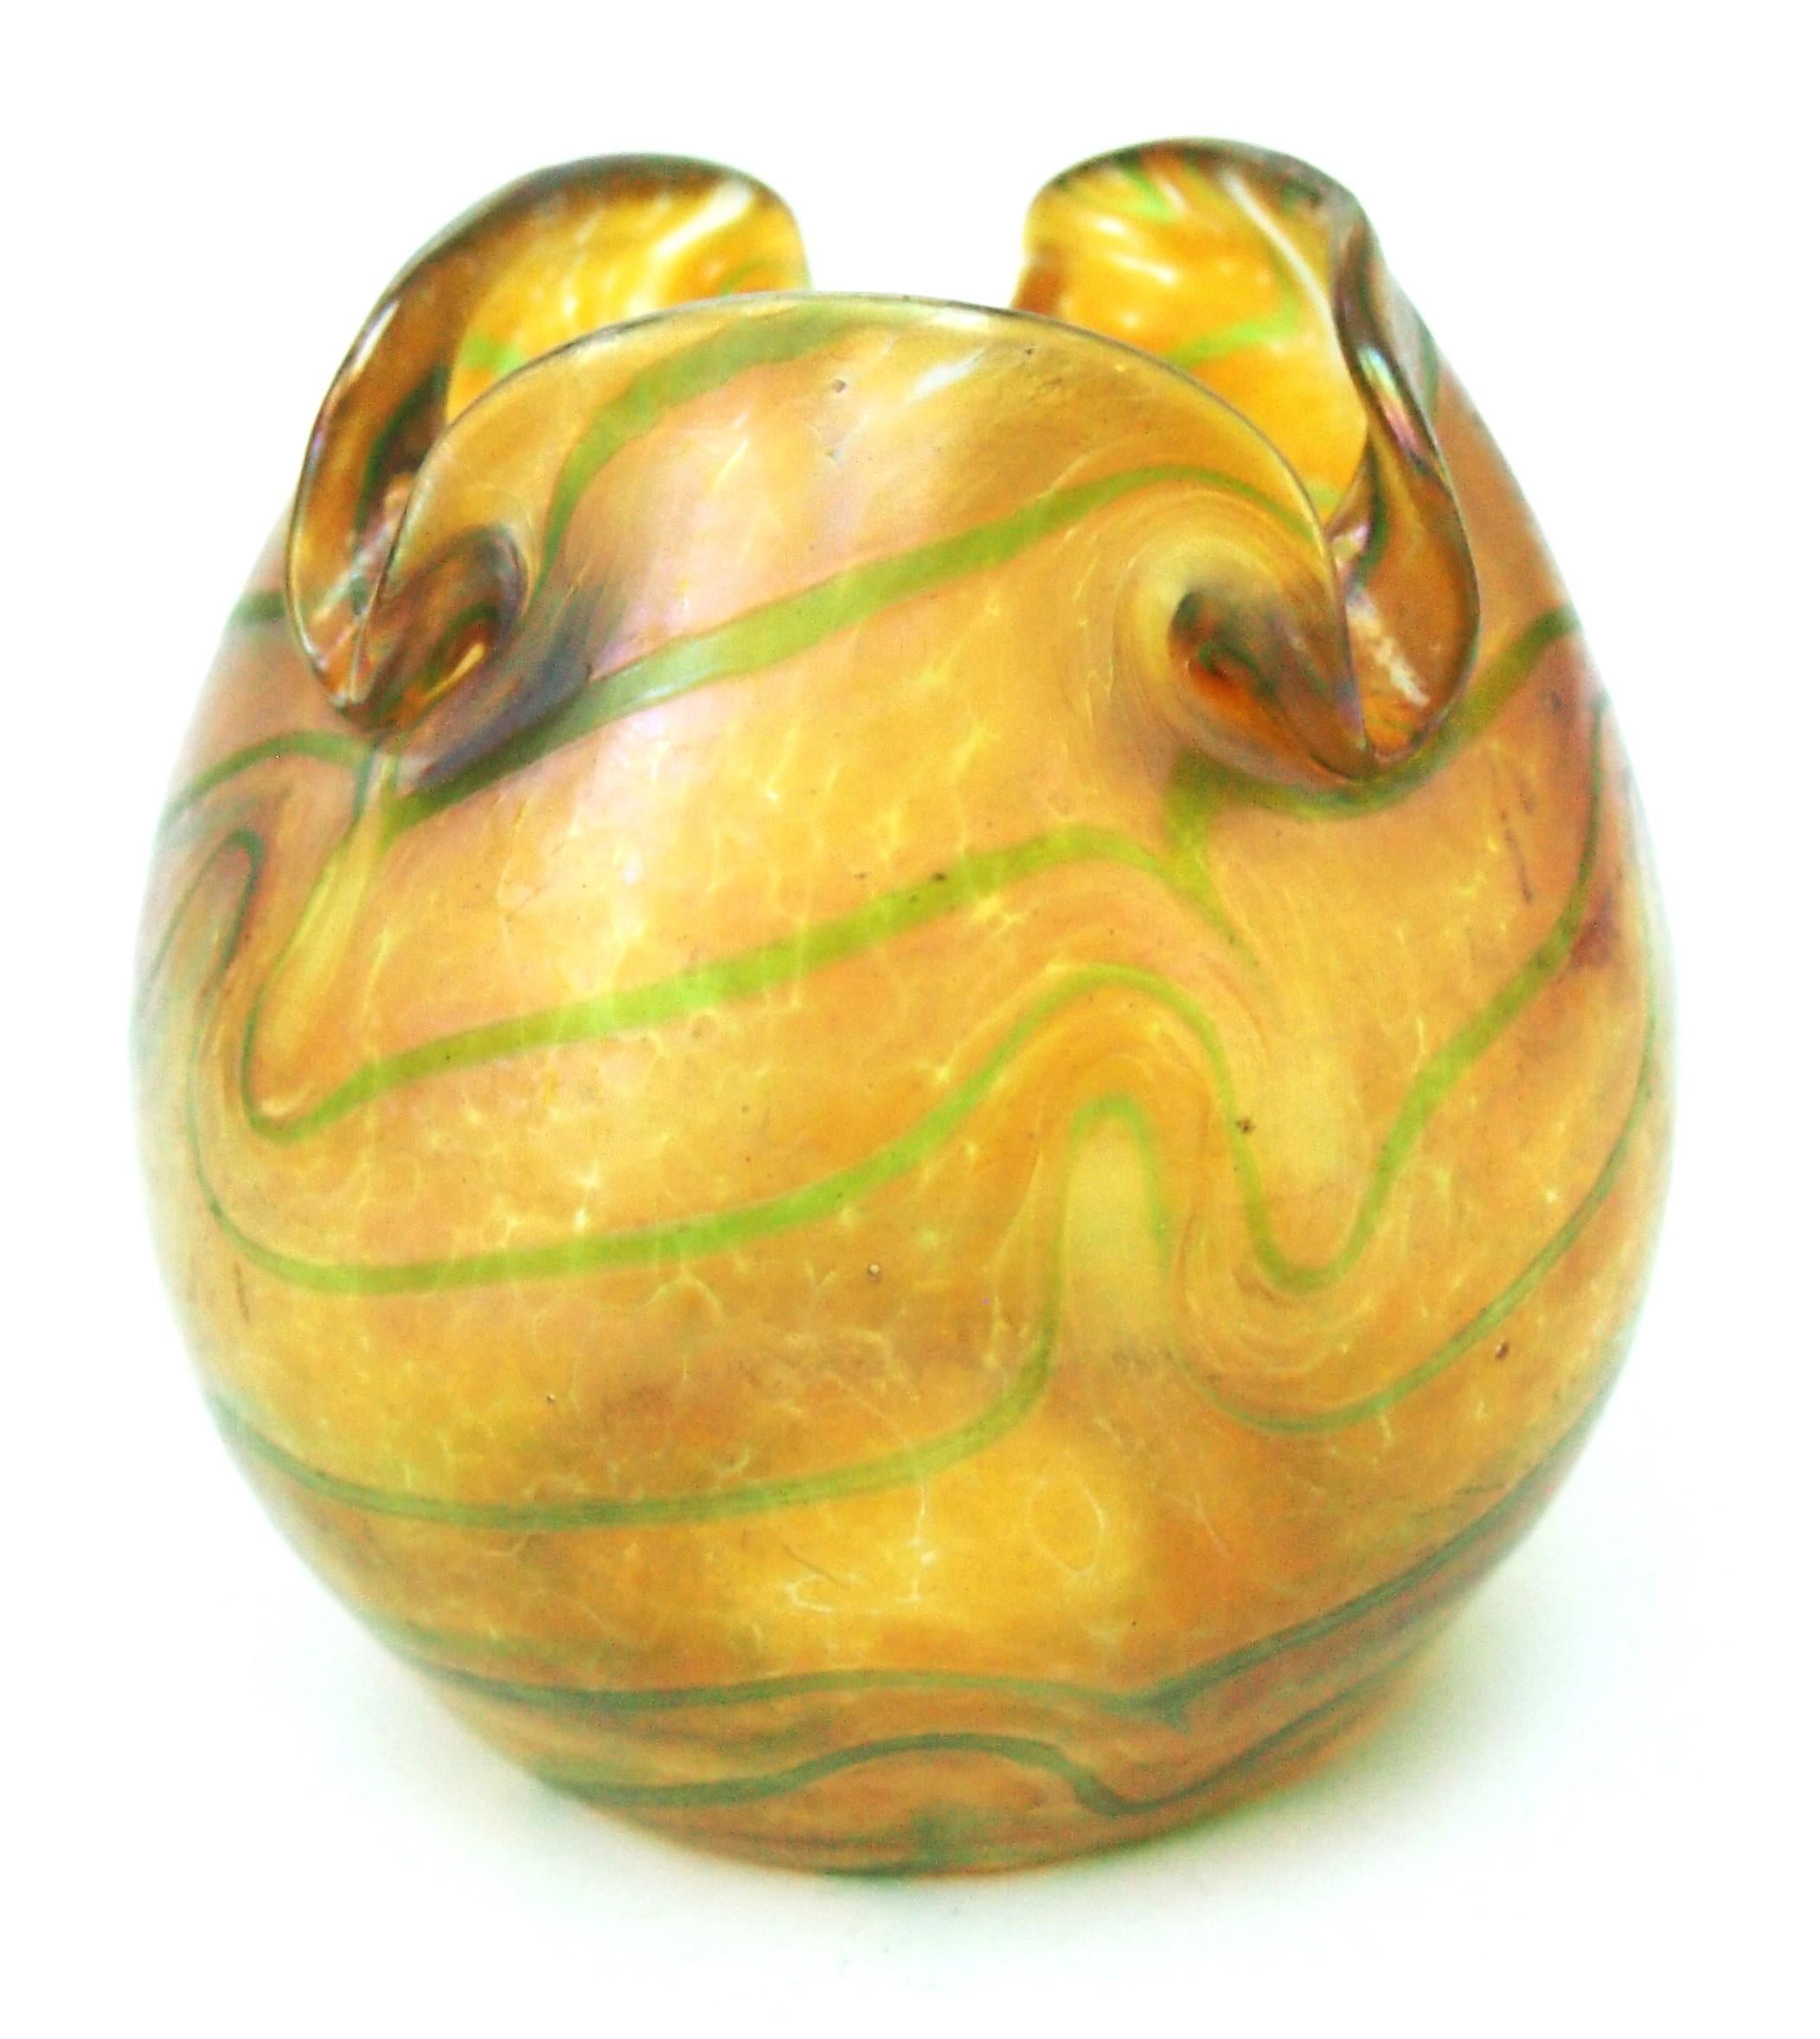 Stunning, small, open top globe like Fritz Heckert iridised Vase -Green banded over brightly iridised orange yellow- Designed by Heckert's protégé and Son-in-Law Otto Thamm -The pattern is called Changeant. The iridisation and combed decoration is